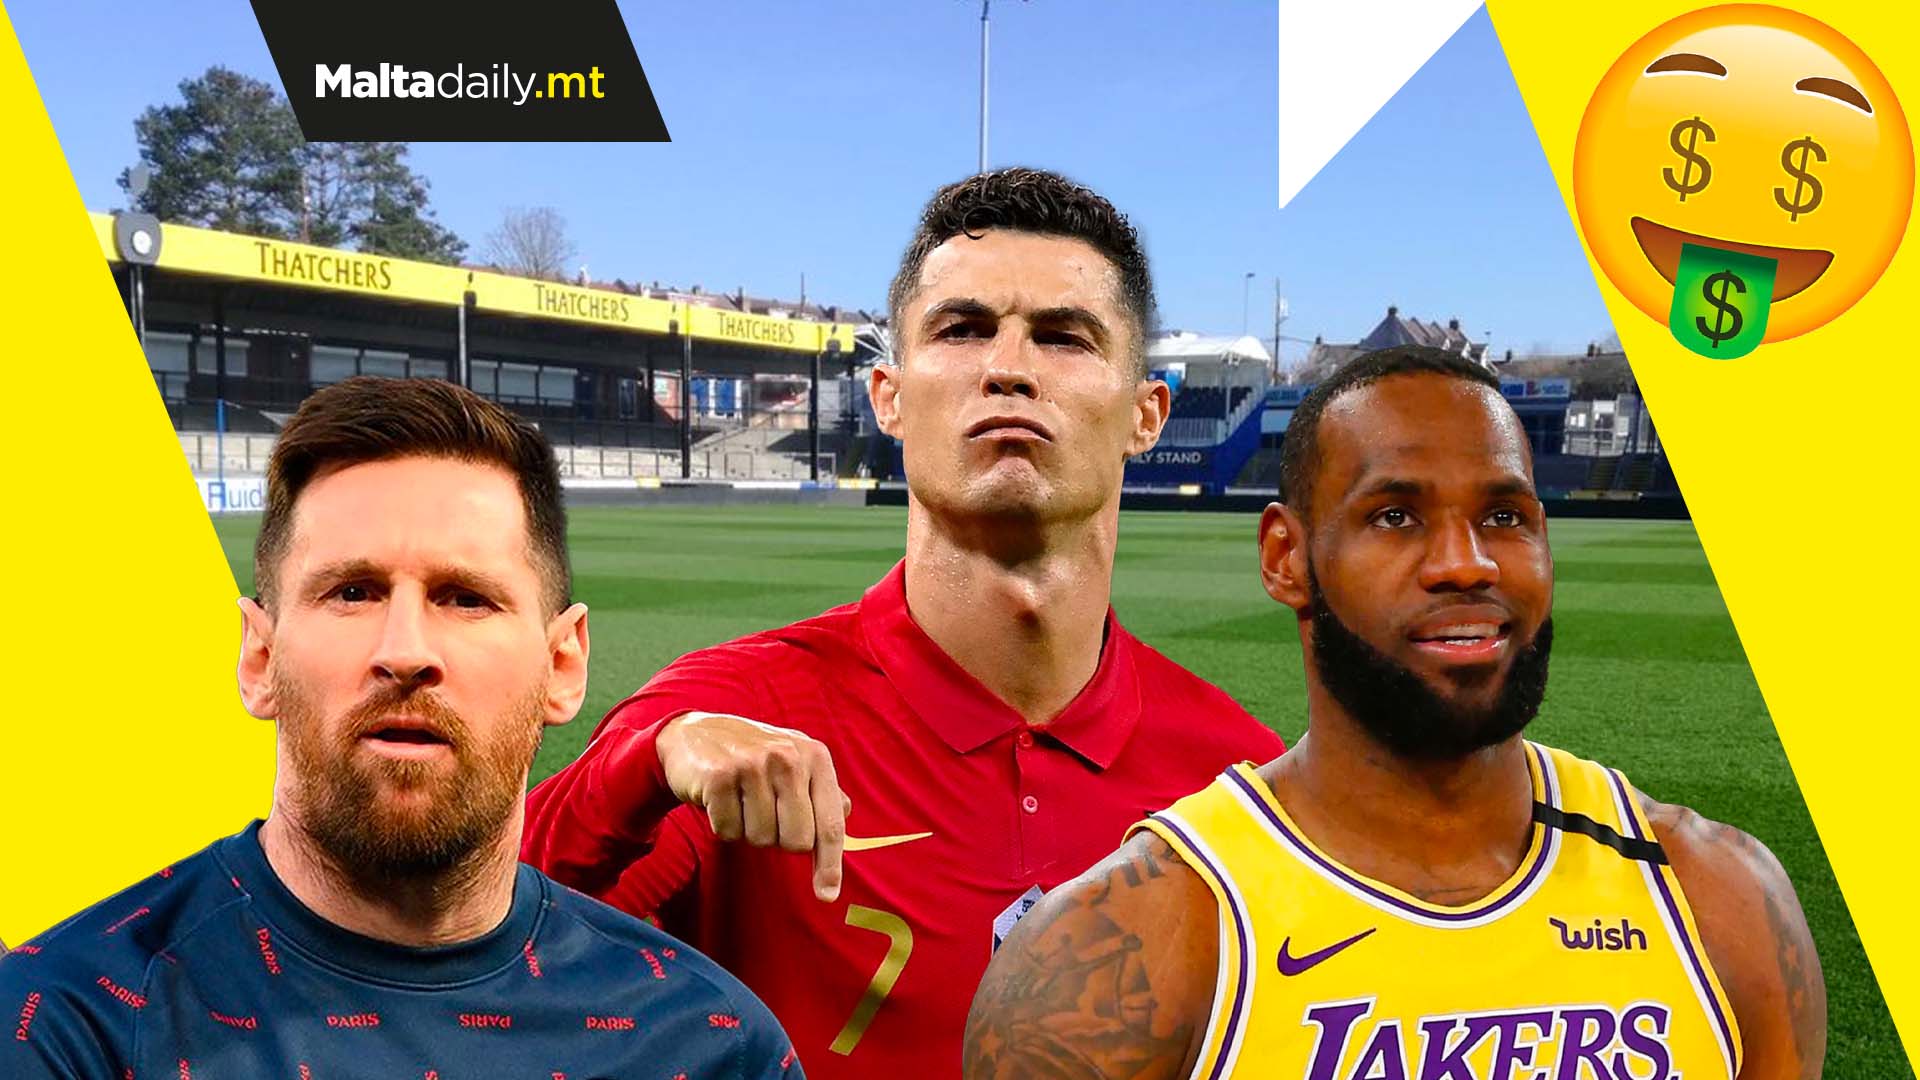 Here are Forbes’ top 5 highest paid athletes for 2022